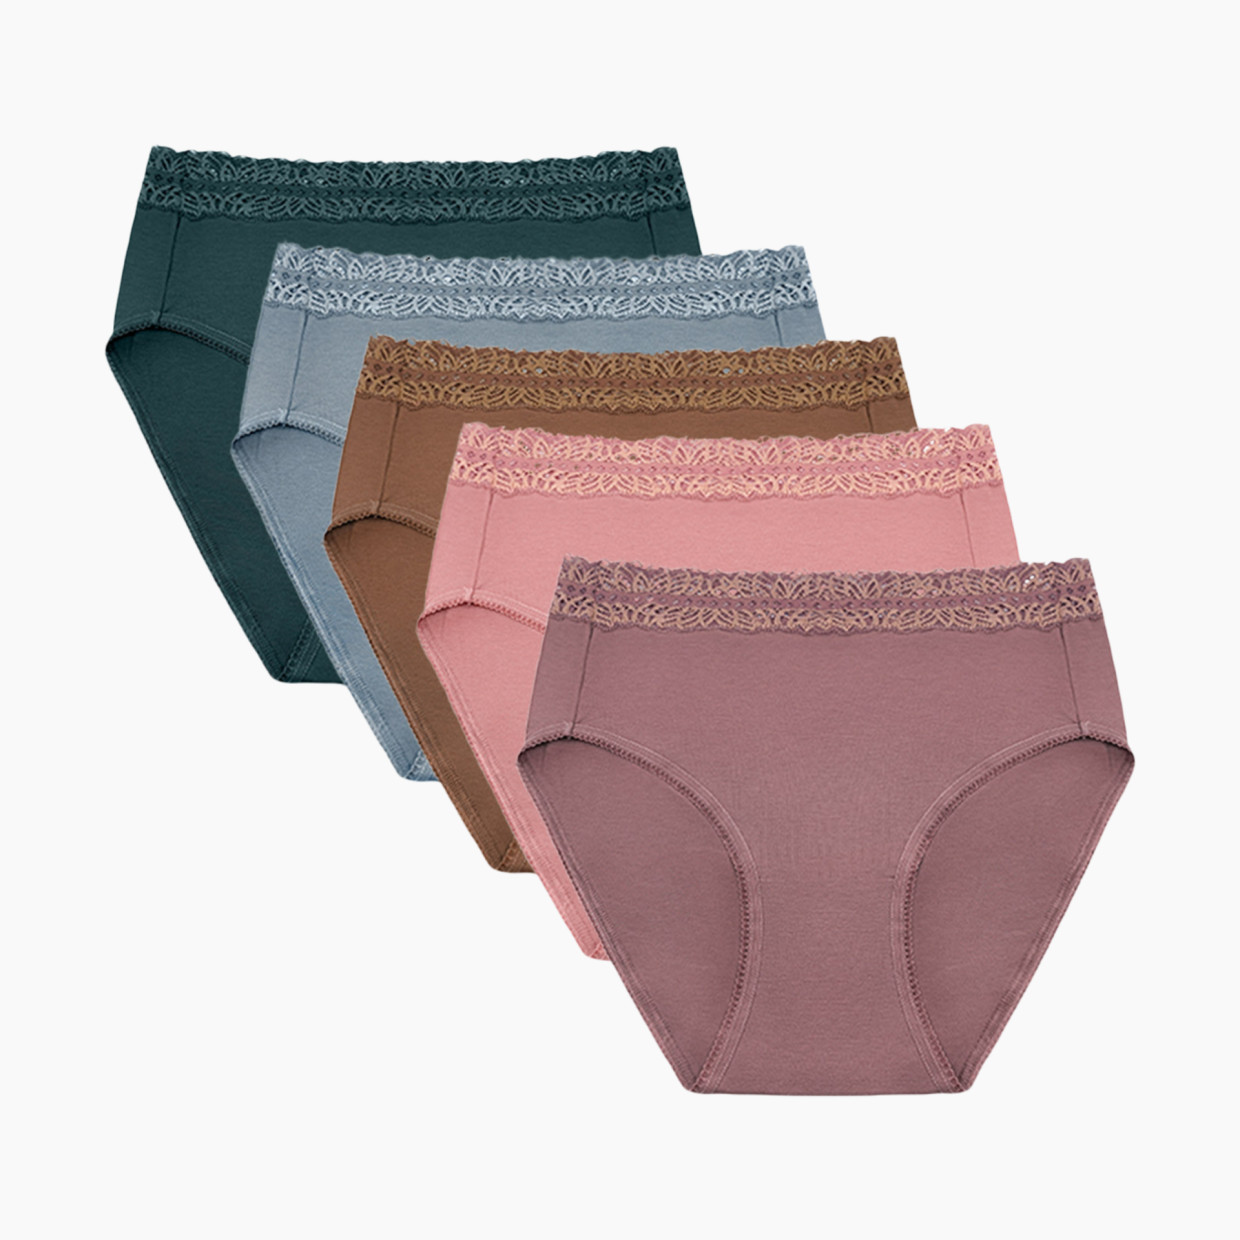 Kindred Bravely High Waist Postpartum Underwear & C-Section Recovery Maternity Panties (5 Pack) - Dusty Hues, Large.